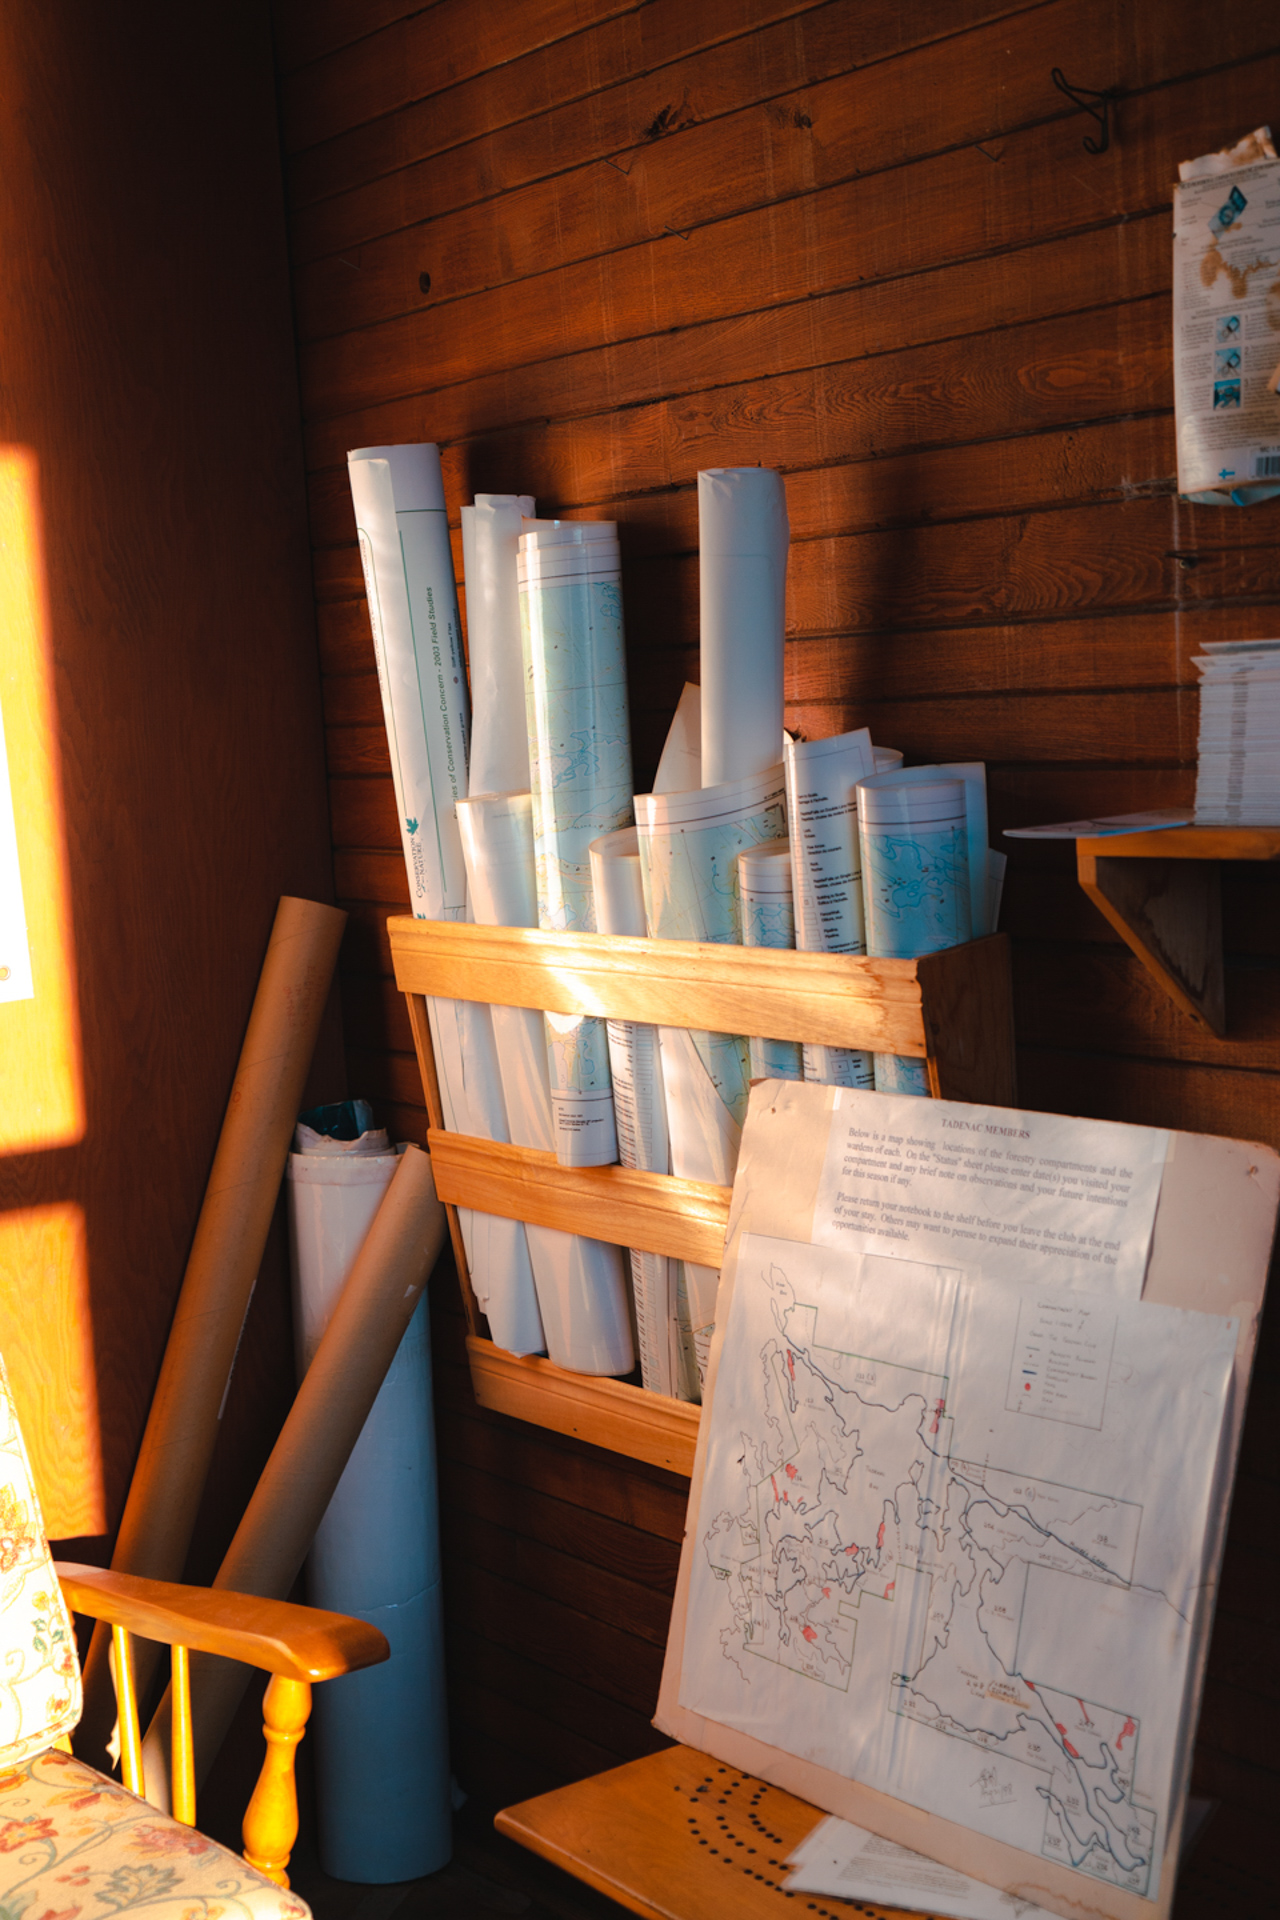 This photo consists of a brightly lit wooden cabin room. There are several maps rolled up in the corner of the room and stored on a hanging shelf. There is also a map on a wooden stand with colored outlines and descriptions.